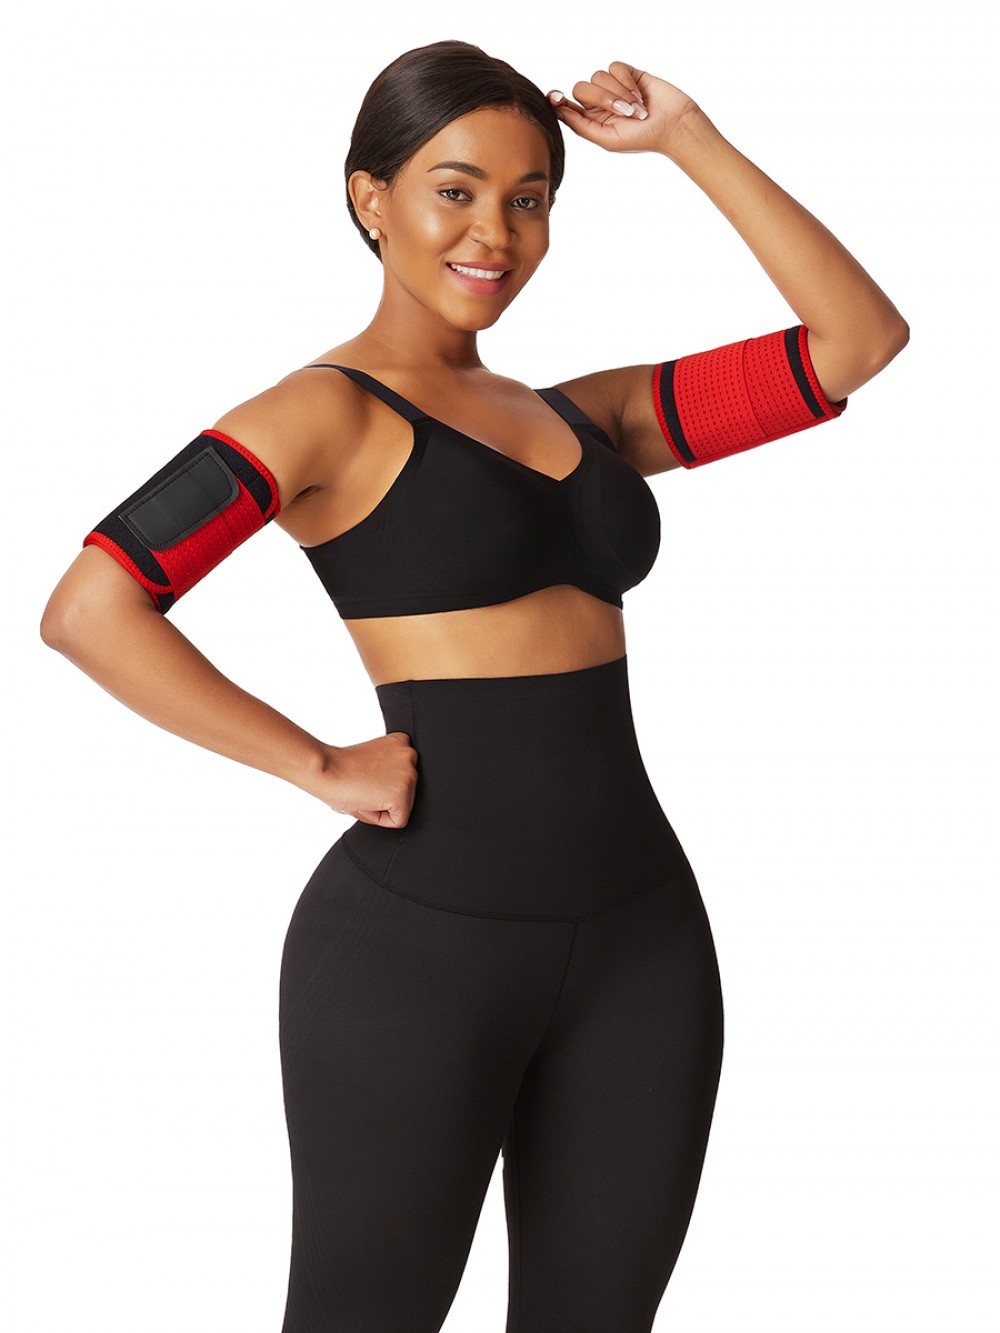 Red Neoprene Arm Shaper With Elastic Bands High Quality